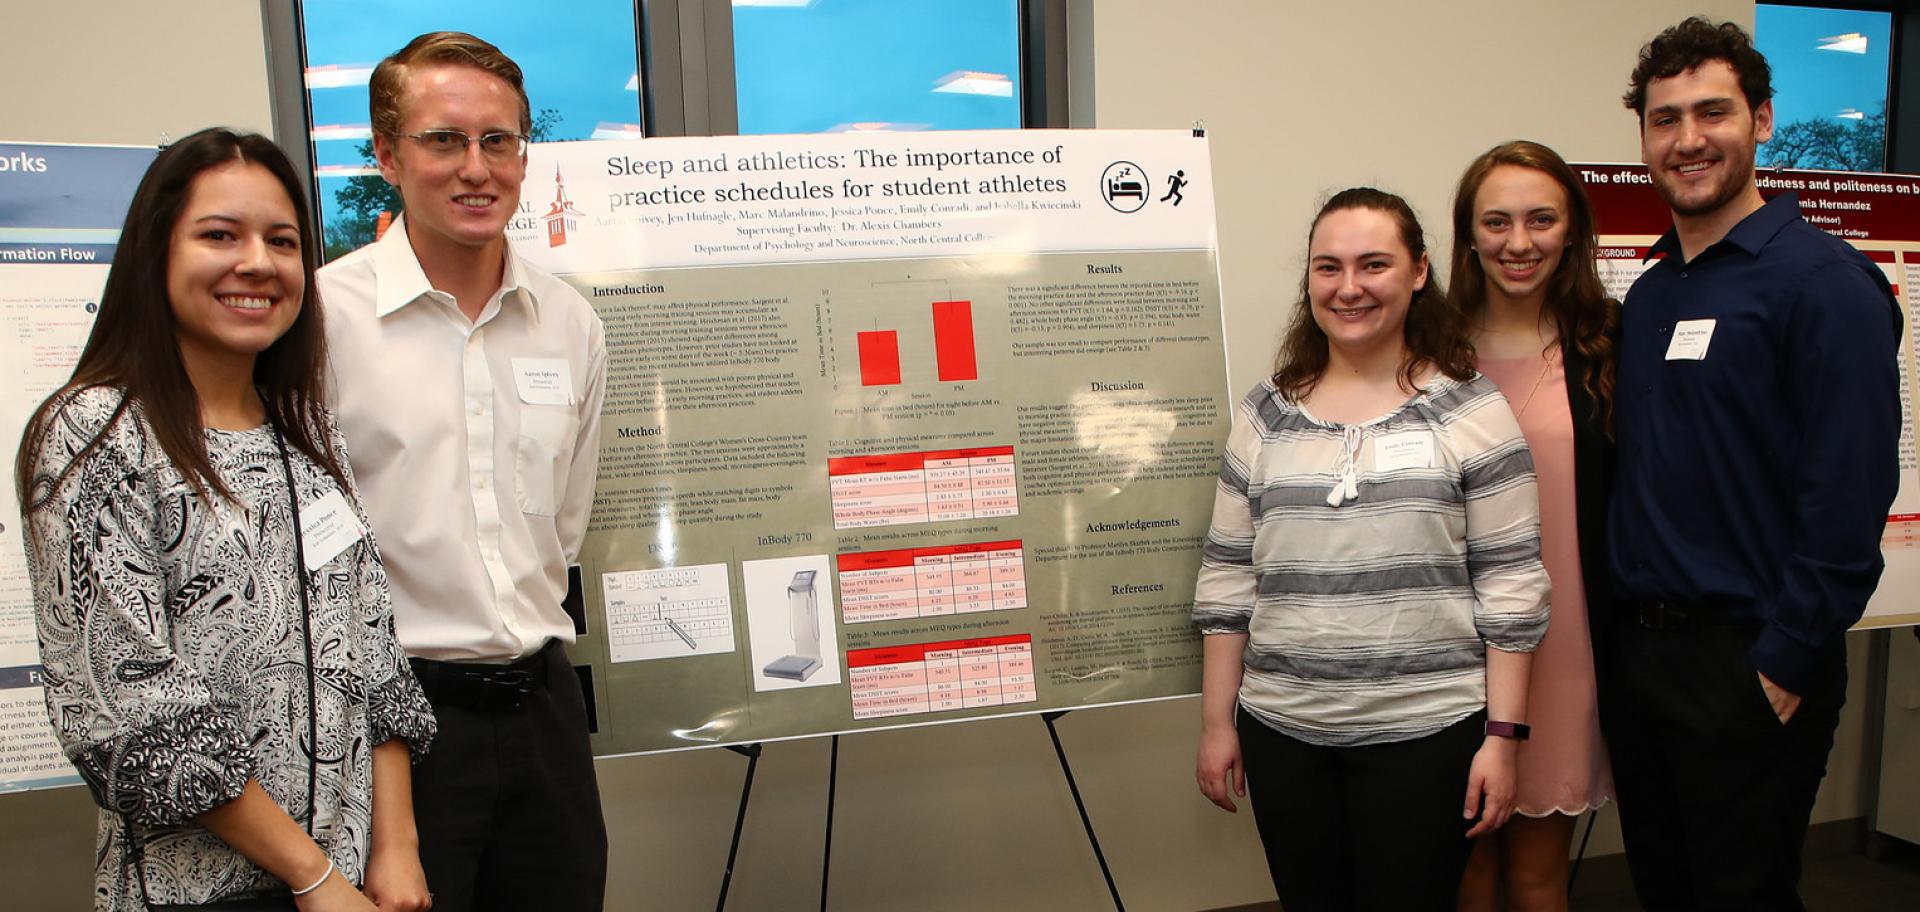 The researchers present their project at the Rall Symposium.